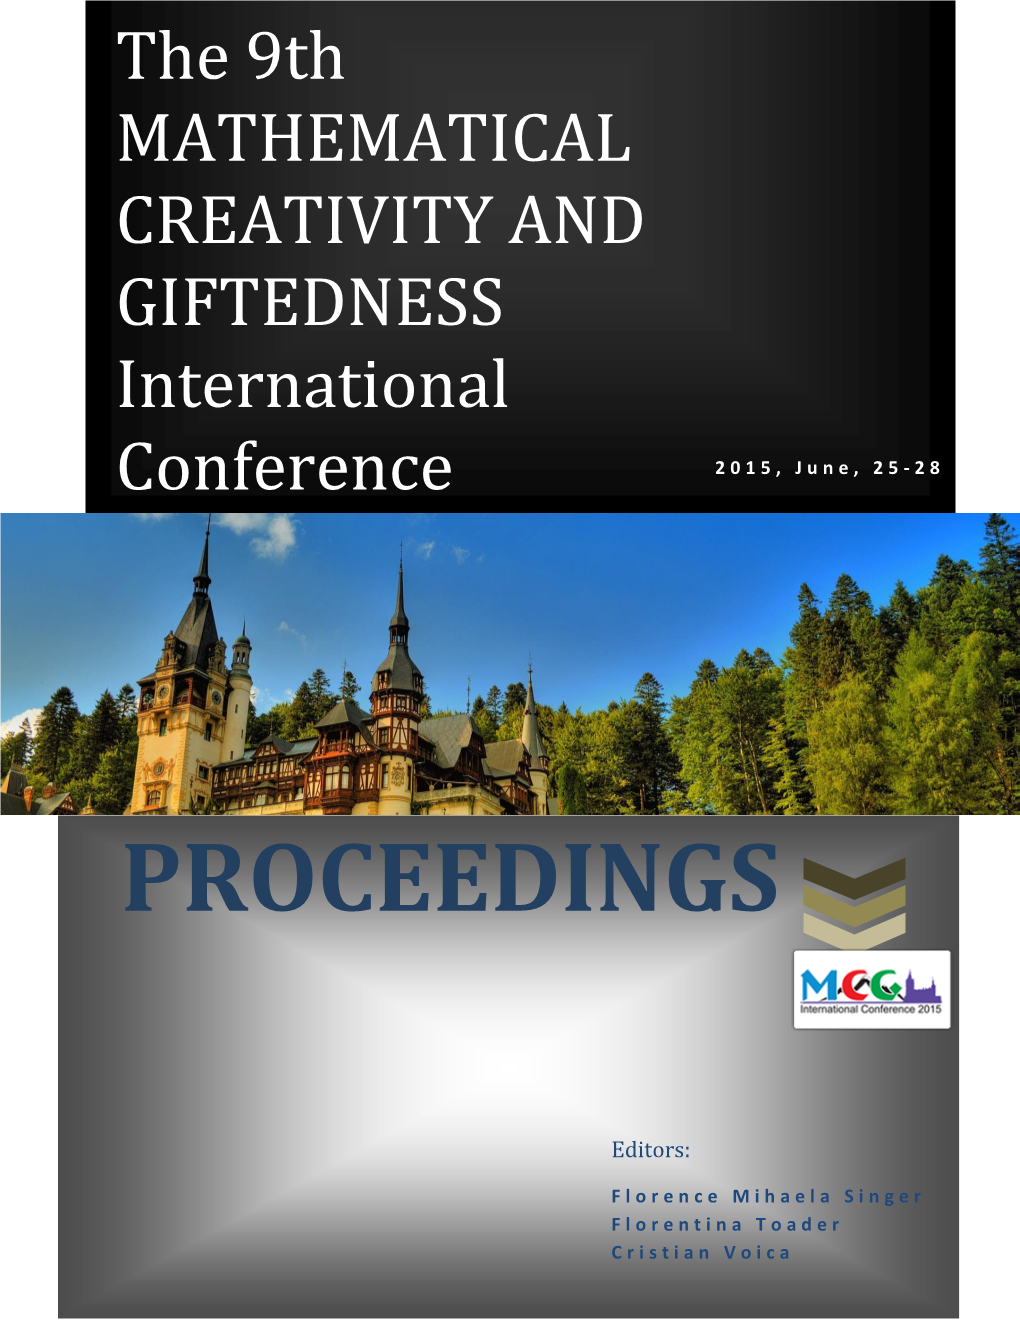 The 9Th MATHEMATICAL CREATIVITY and GIFTEDNESS International Conference